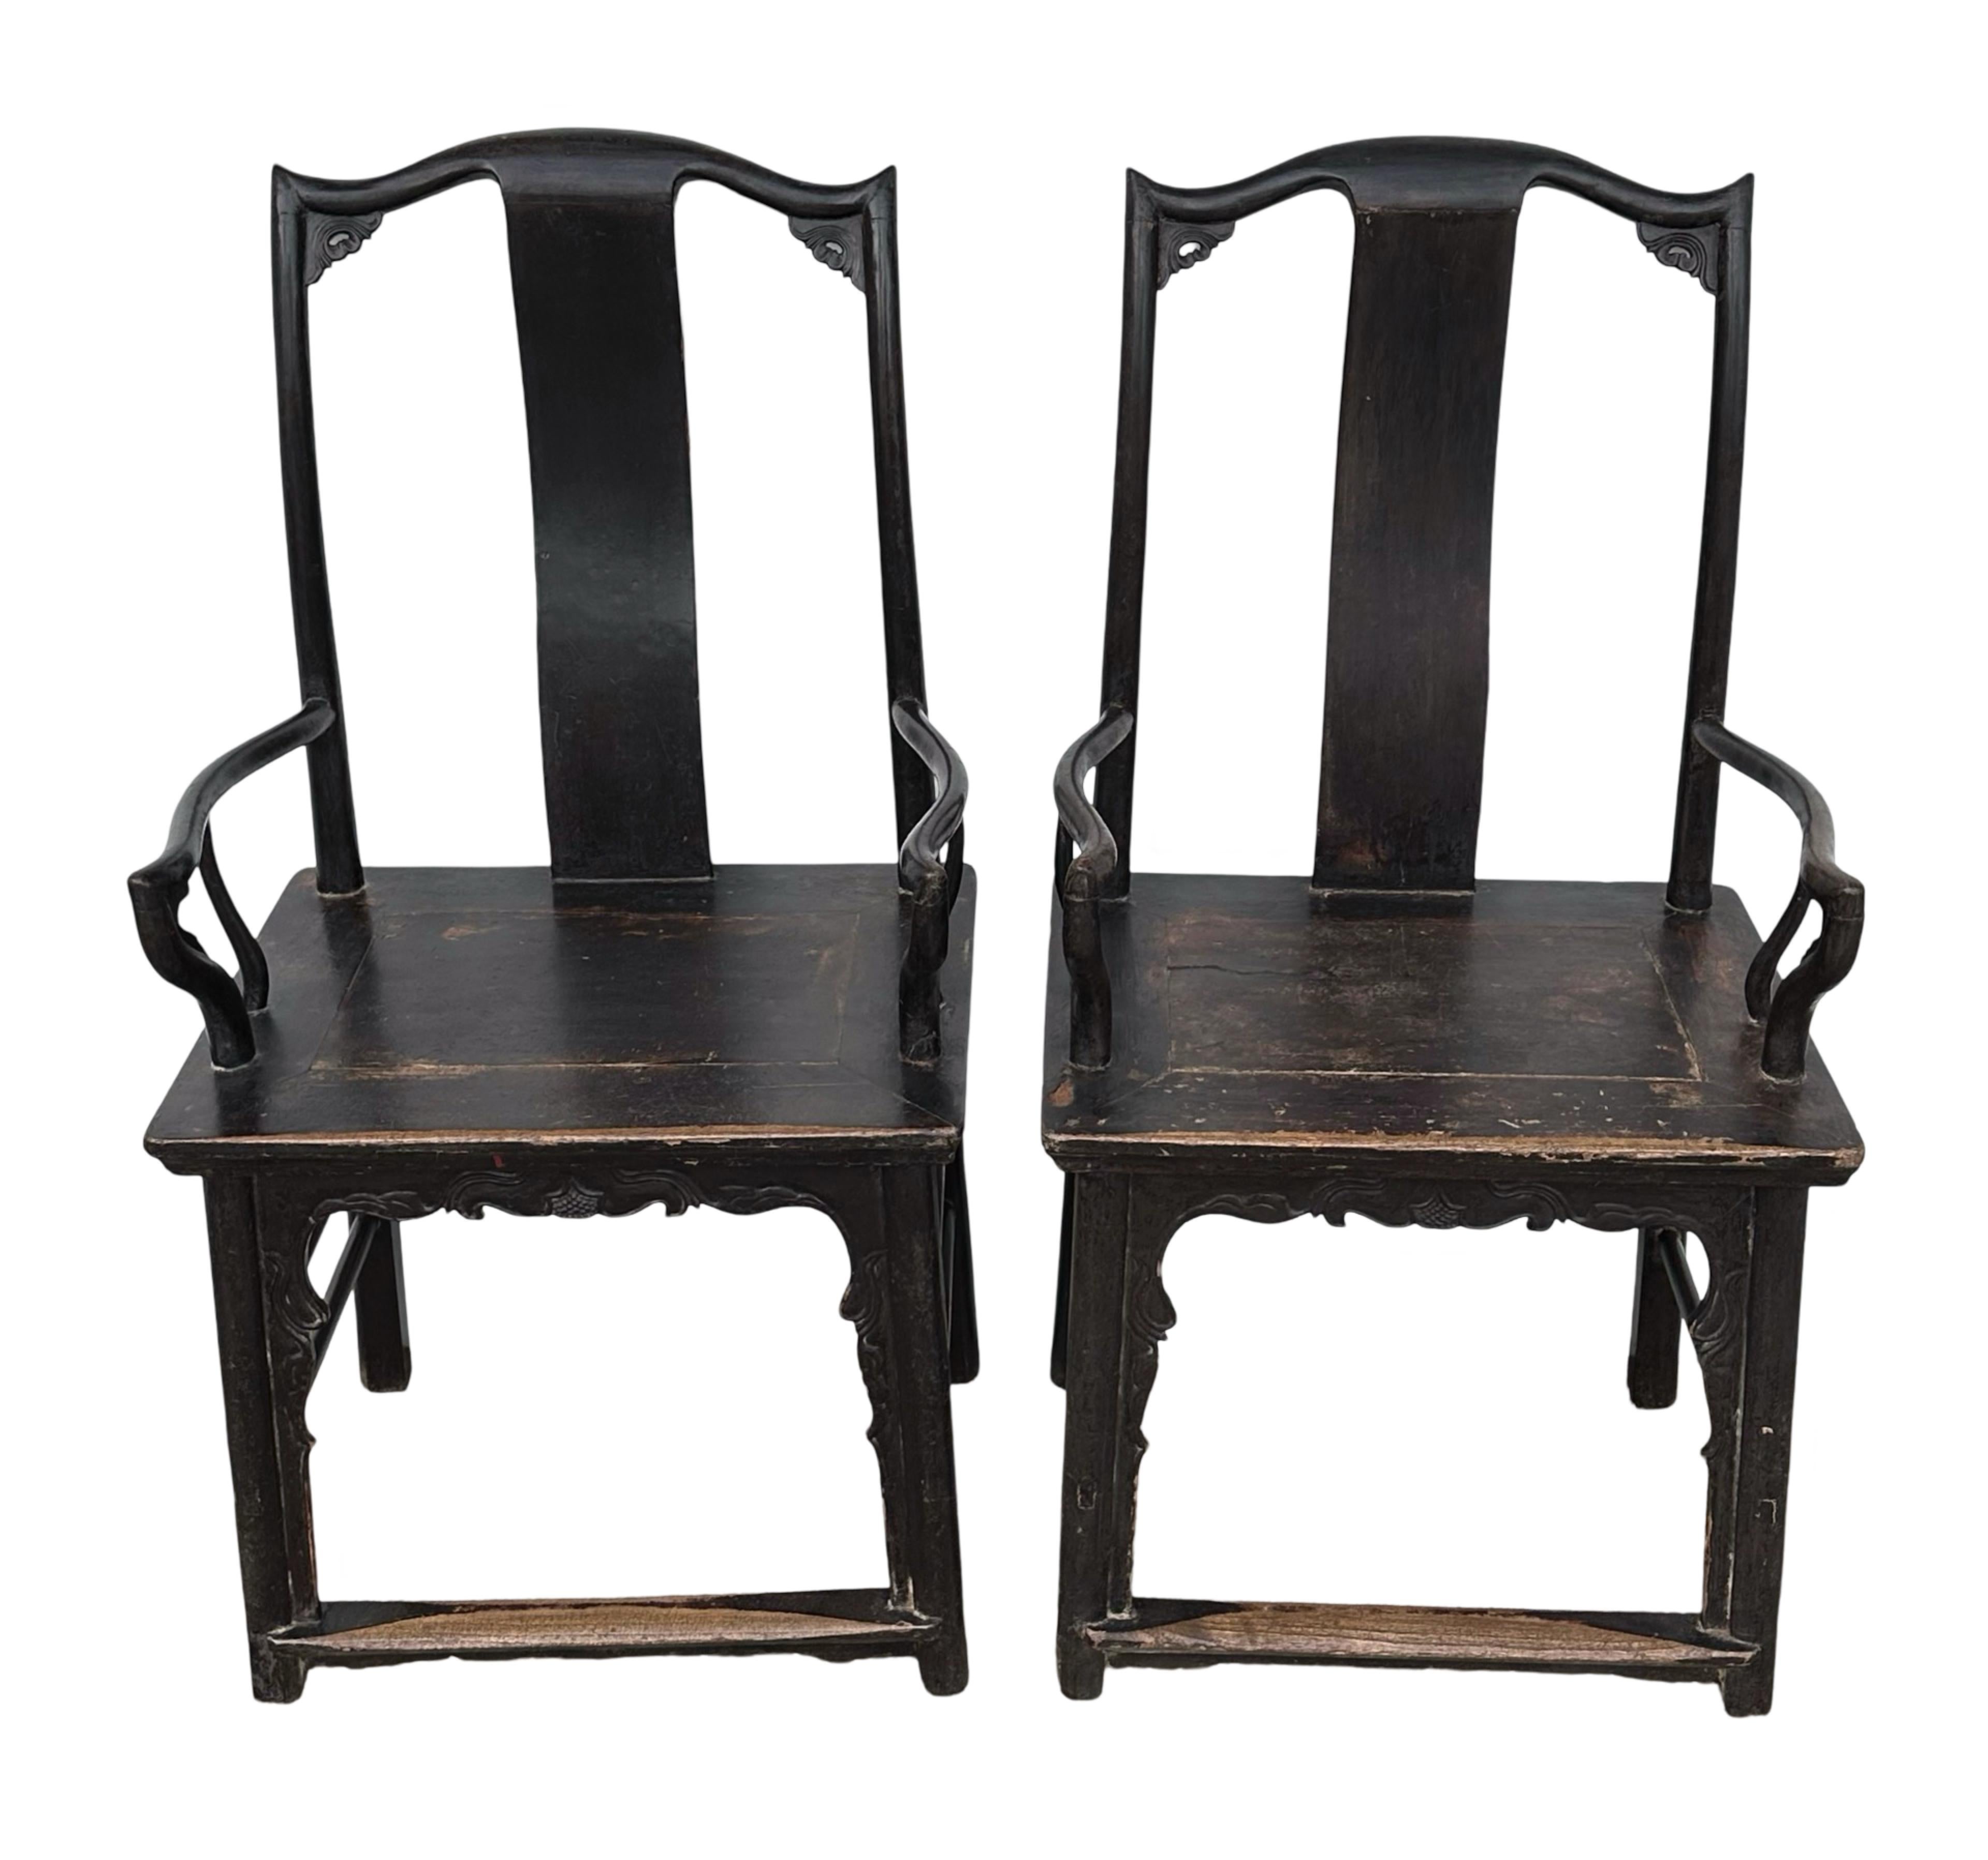 A pair of black lacquered Ming-style official hat's chair from Shanxi province. The origin of the name is because the crest rail at the top of the chairs resembles the winged hats of government officials. The slight angle at the top also makes it